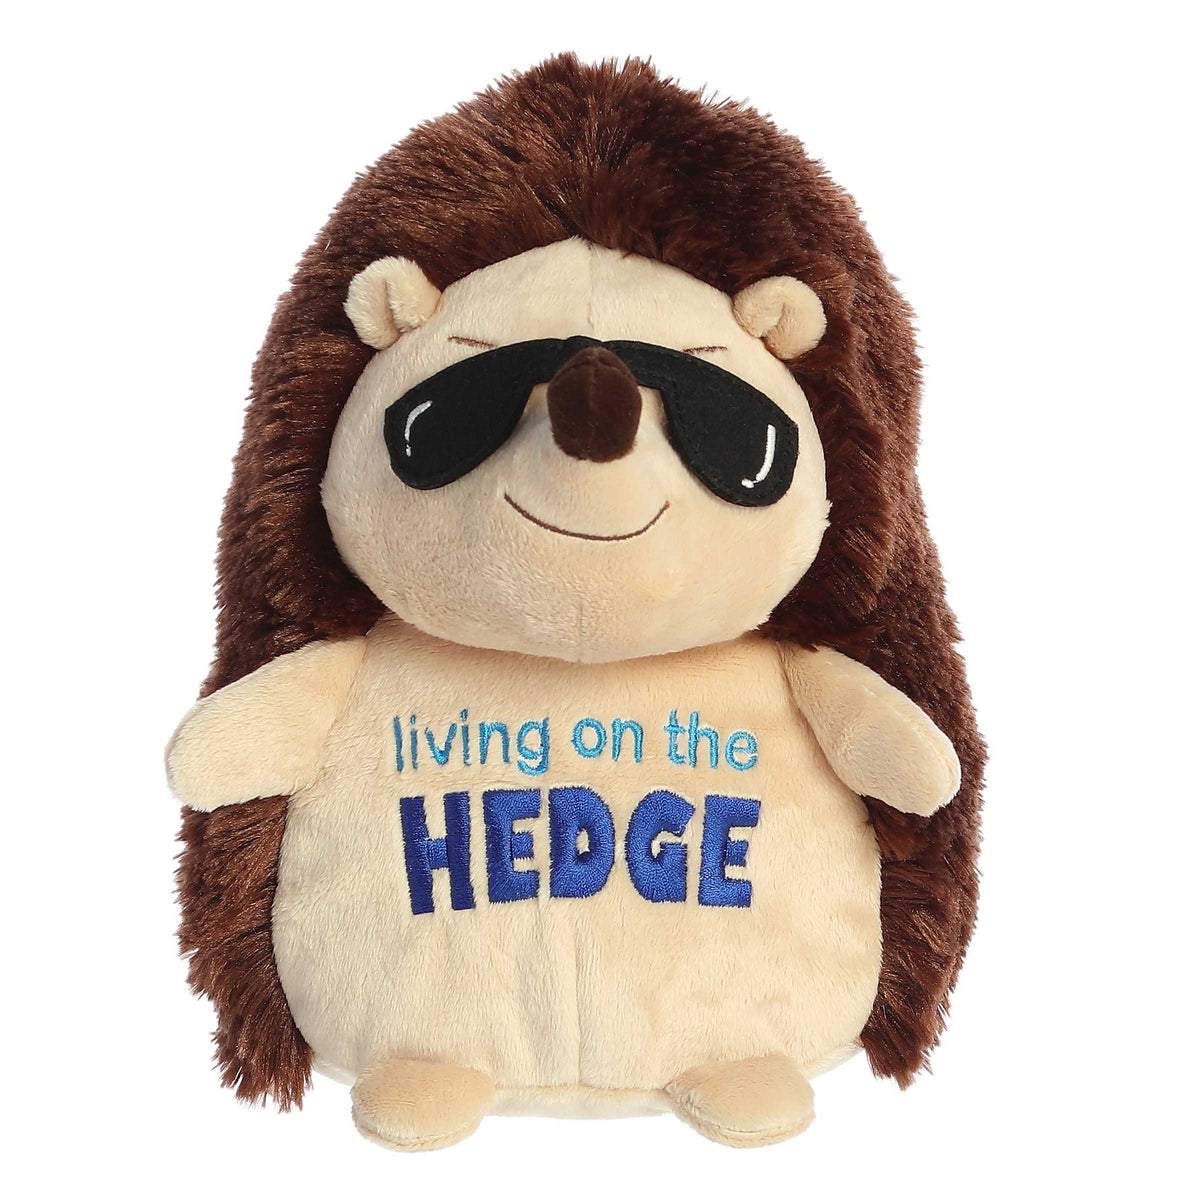 Cute hedgehog plush with light brown body and dark brown fur, "living on the hedge" pun written across and glasses on face